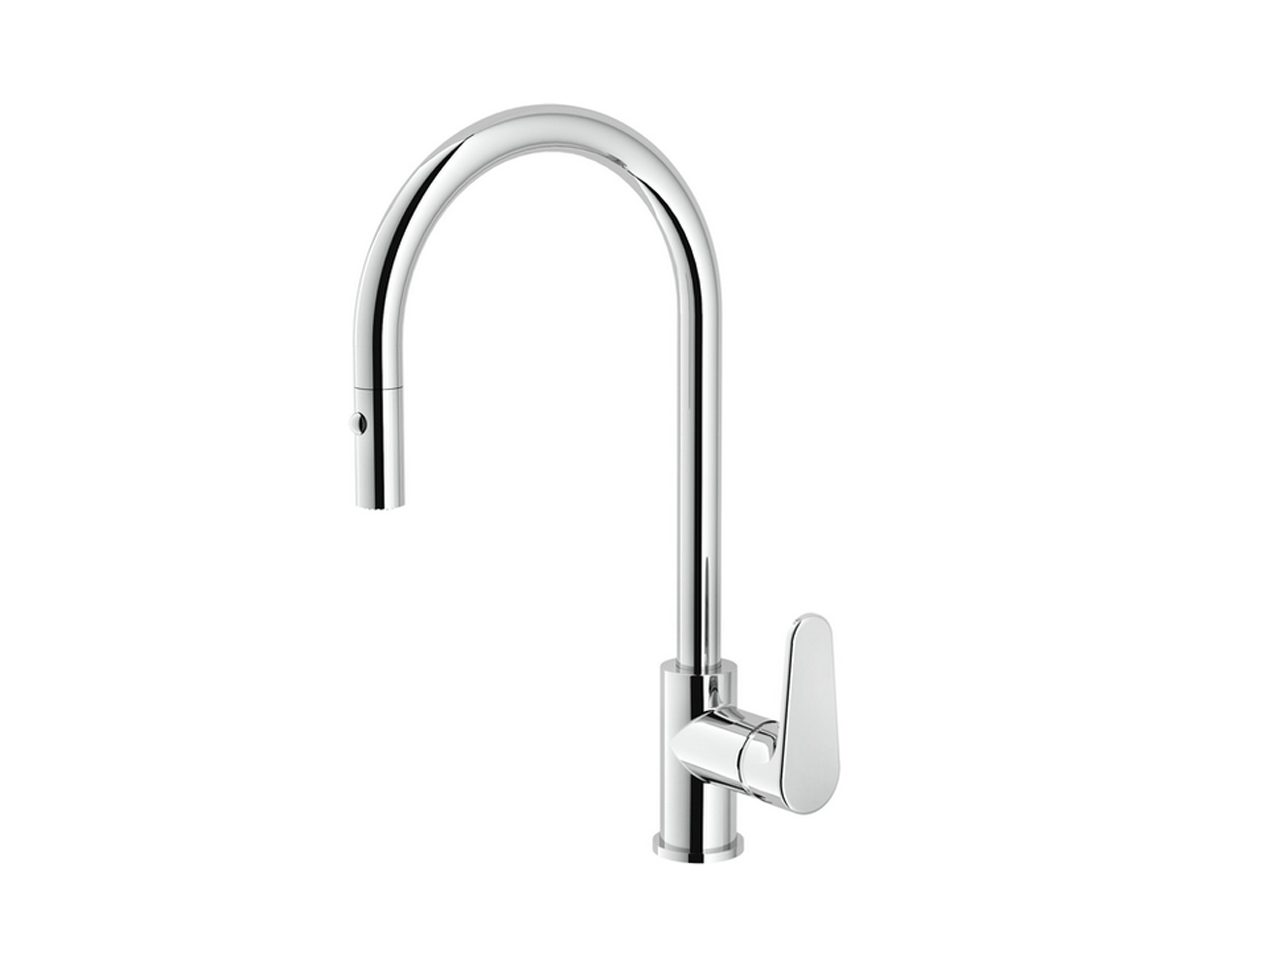 CisalSingle lever sink mixer ES with pull out handspray KITCHEN_A3000575